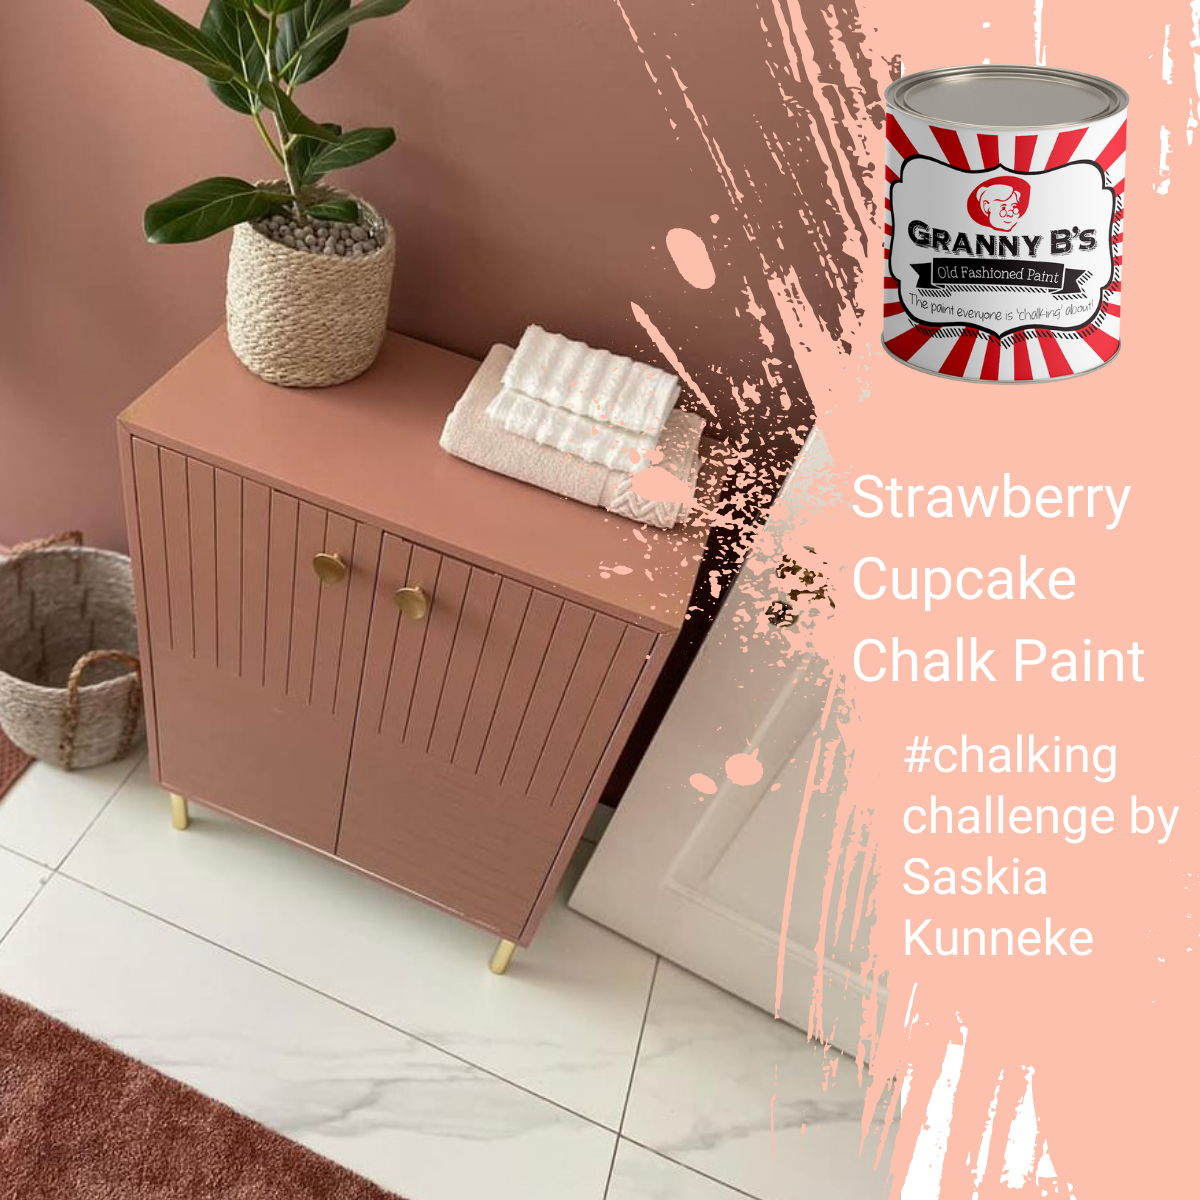 Chalkpaint - Strawberry Cupcake (Vintage Pink) - Granny B's Old Fashioned Paint